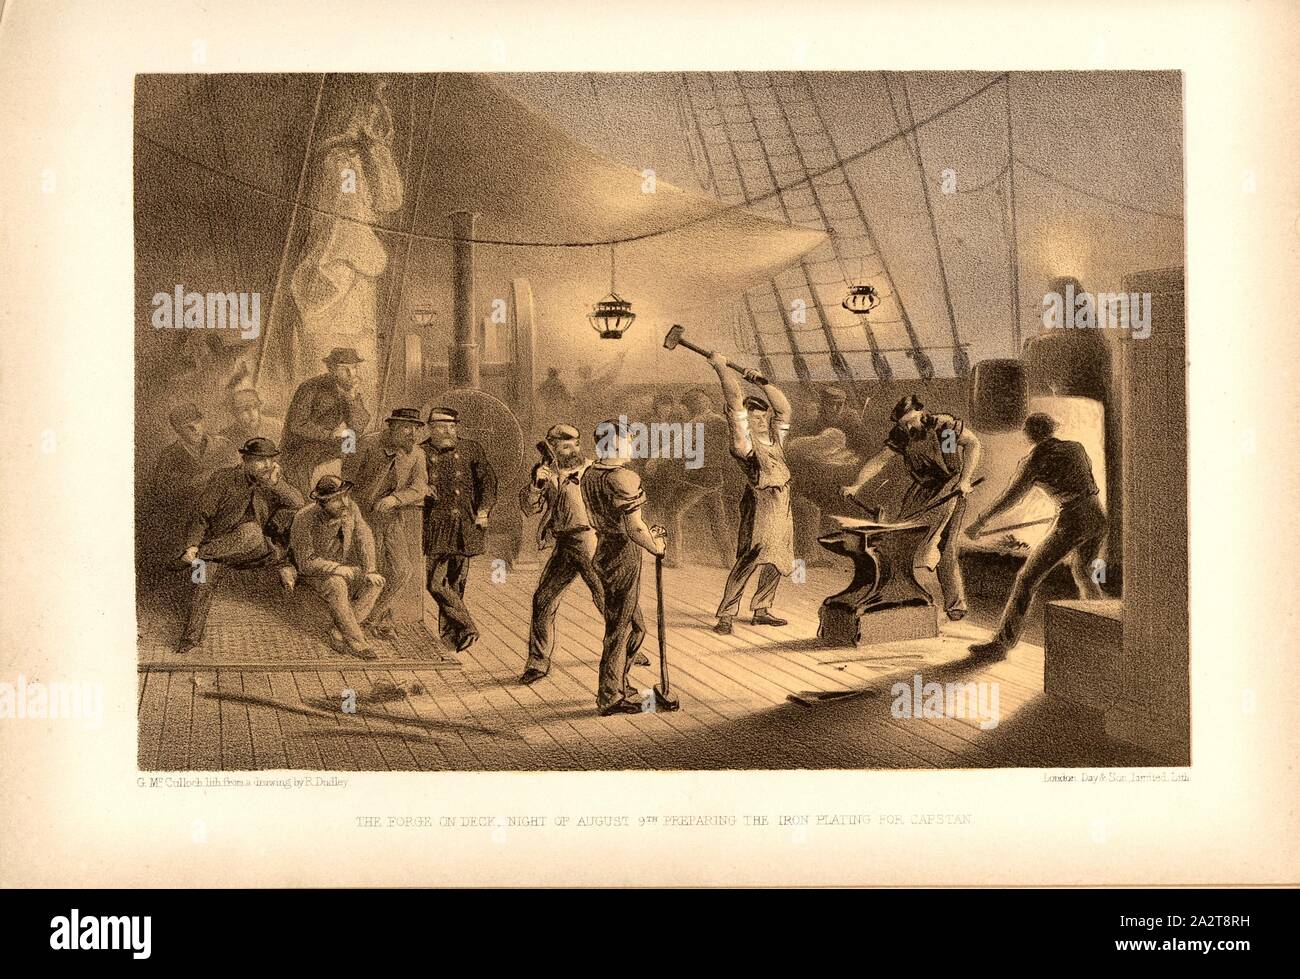 The forge on deck night of August 9th preparing the iron plating for capstan, Forge stove on the deck of the Great Eastern Sailer on August 9, 1865, after the tear of the transatlantic cable, Signed: G. Mc., Culloch lith., from a drawing by R. Dudley; Day & Son, Limited, Lith, Fig. 17, after p. 68, Dudley, Robert (ill.), McCulloch, George (lith.); Day & Co (lith.), 1866, William Howard Russell; Robert Dudley: The atlantic telegraph. Dedicated by special permission to His Royal Highness Albert Edward Prince of Wales. London: Day and son Limited, [1866 Stock Photo